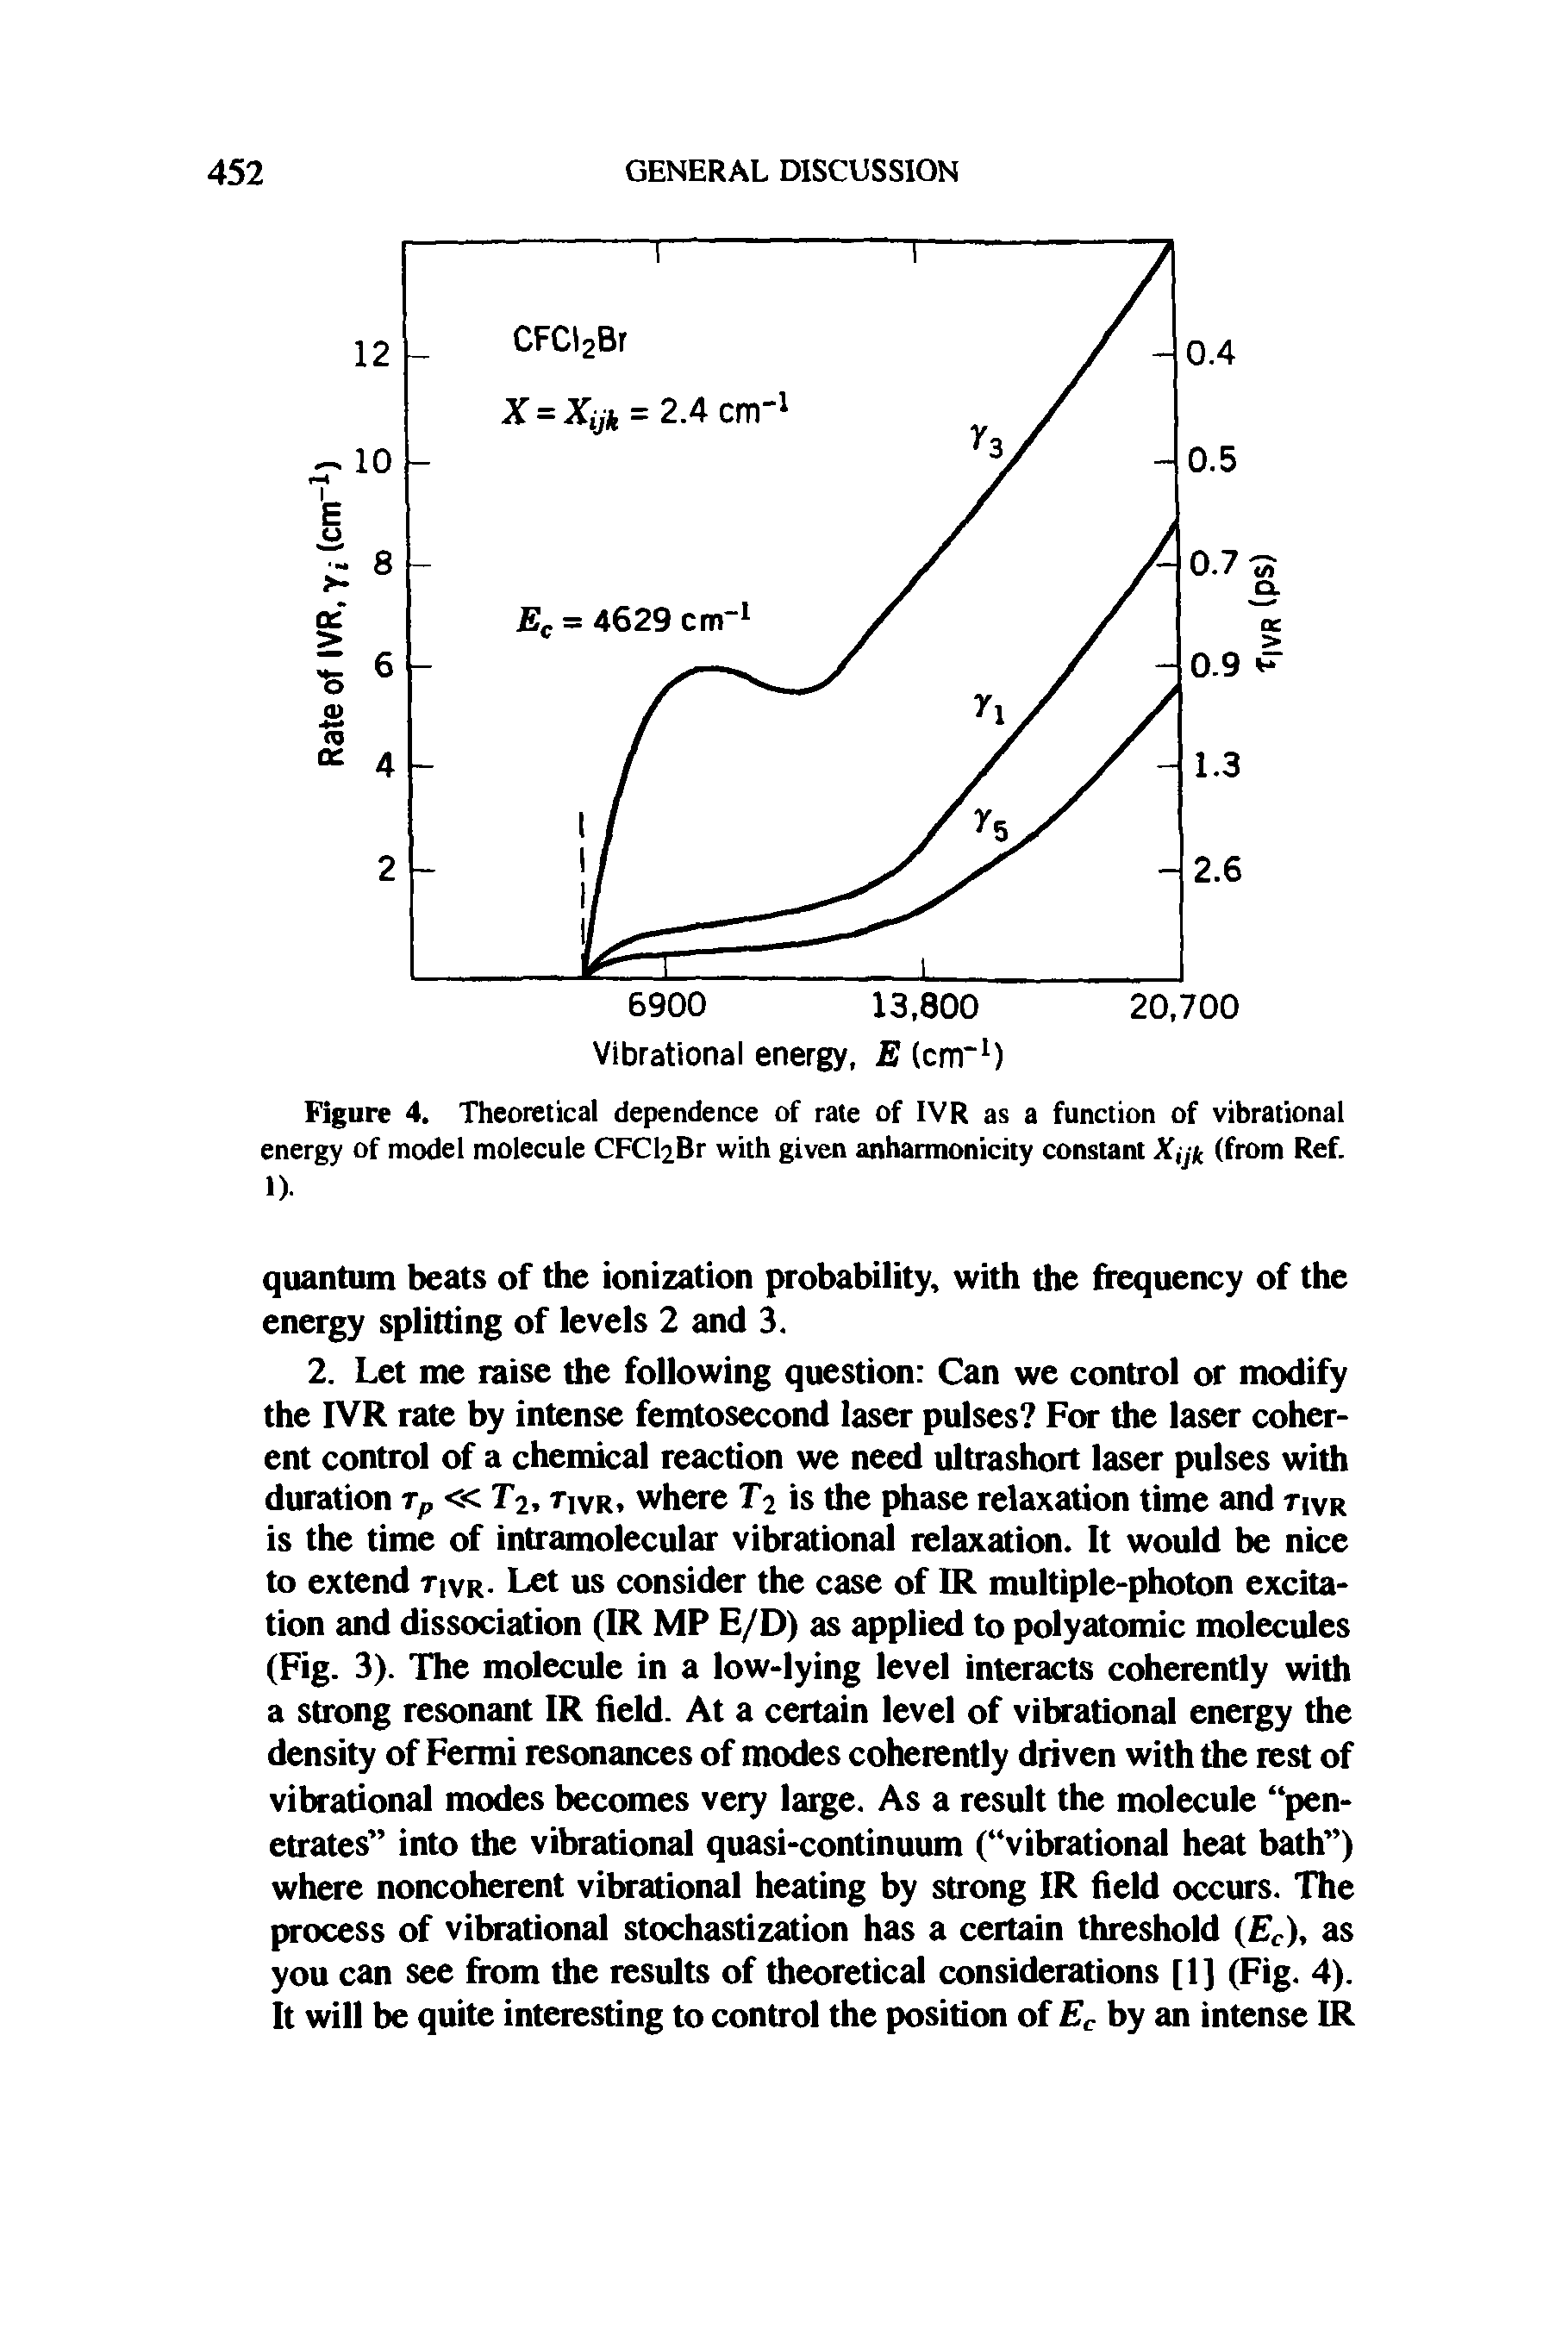 Figure 4. Theoretical dependence of rate of IVR as a function of vibrational energy of model molecule CFCl2Br with given anharmonicity constant (from Ref. 1).